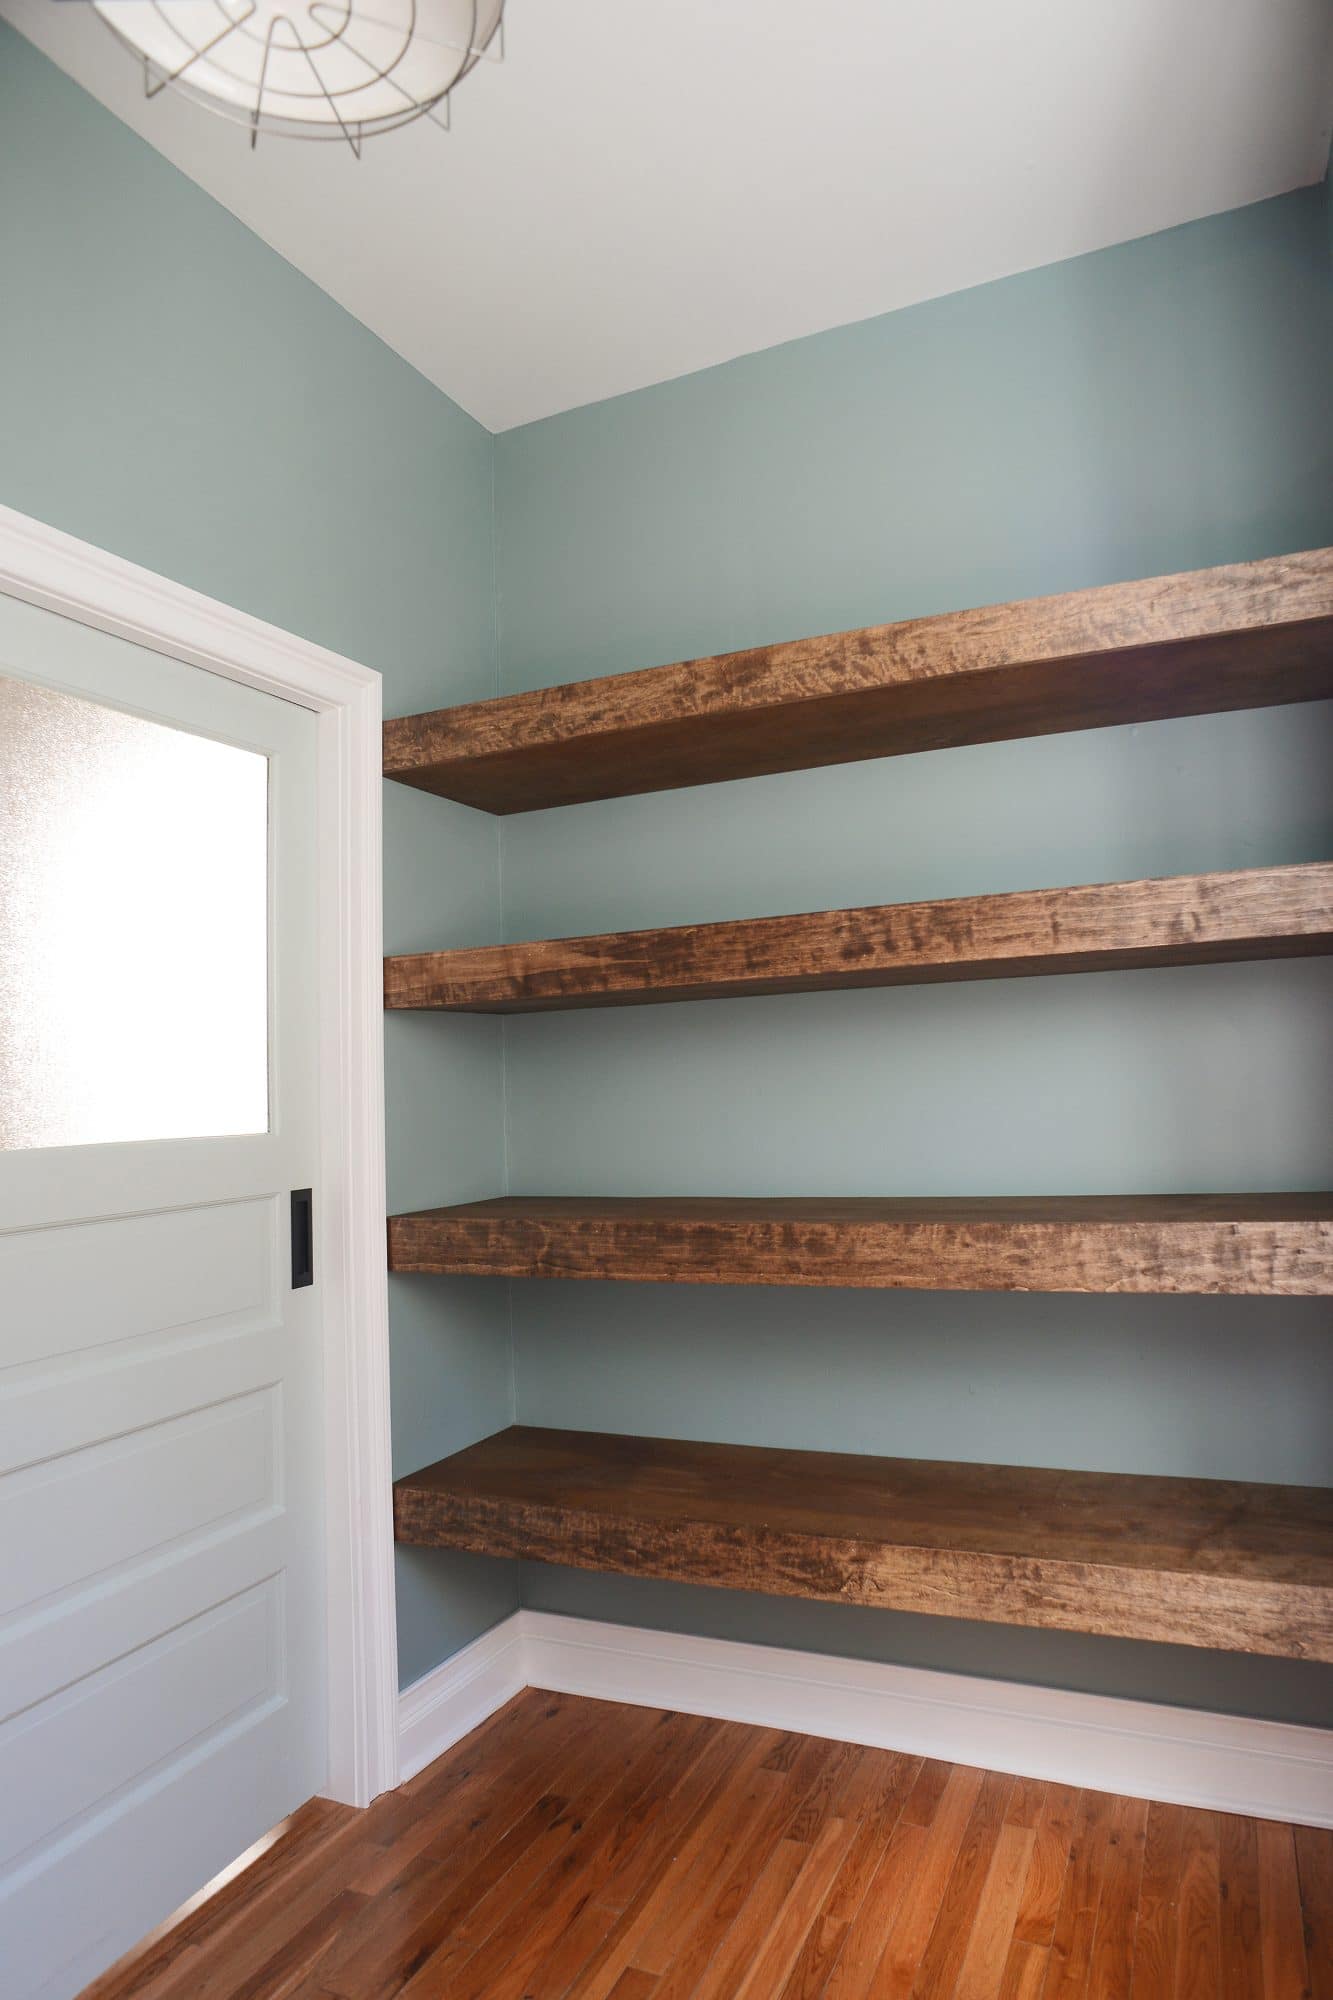 Diy Floating Shelves For Easy Storage, How To Build Floating Shelves For Garage